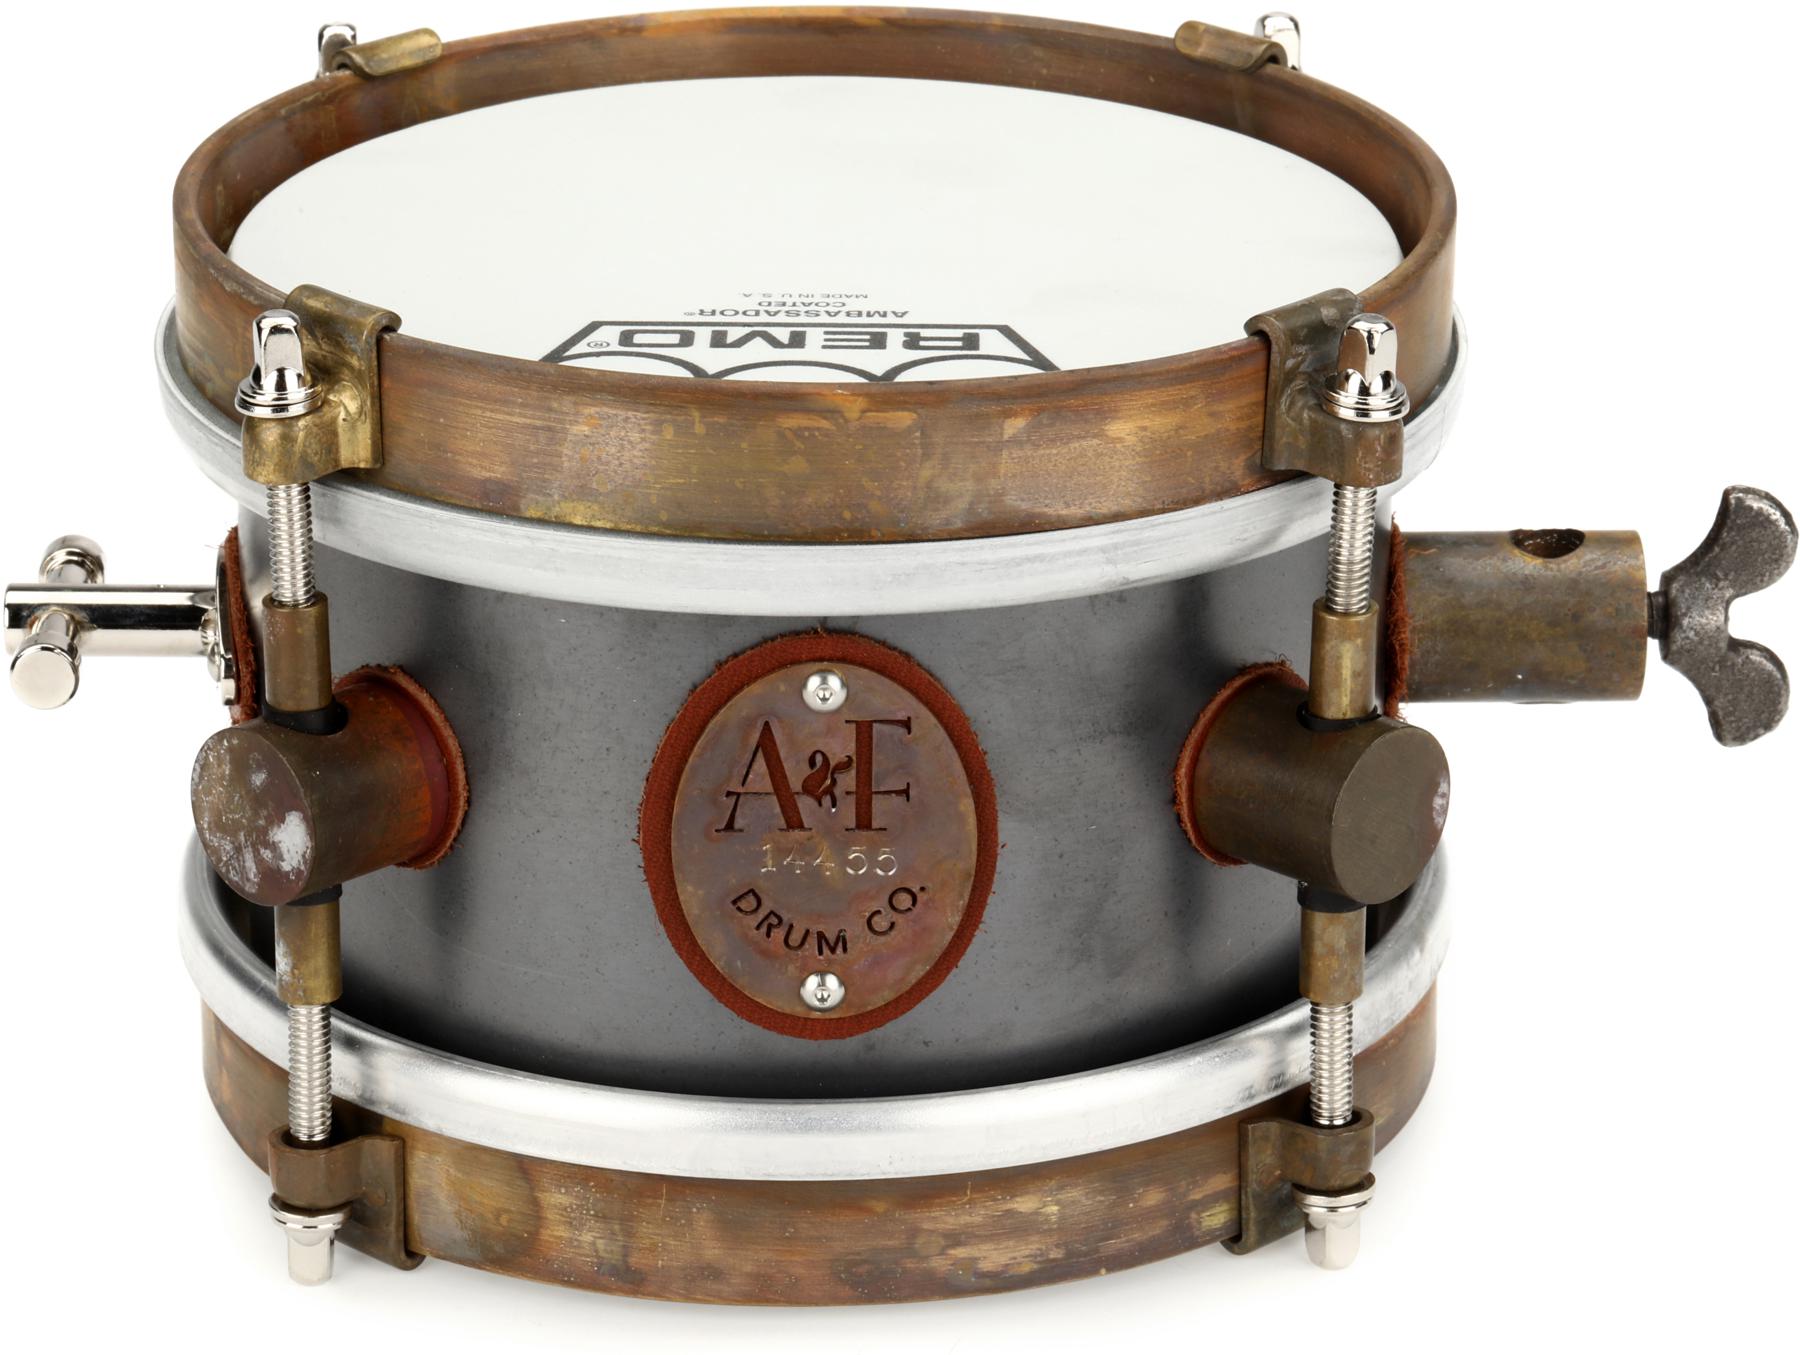 A&F Drum Company Raw Steel Snare Drum - 4 x 6 inch